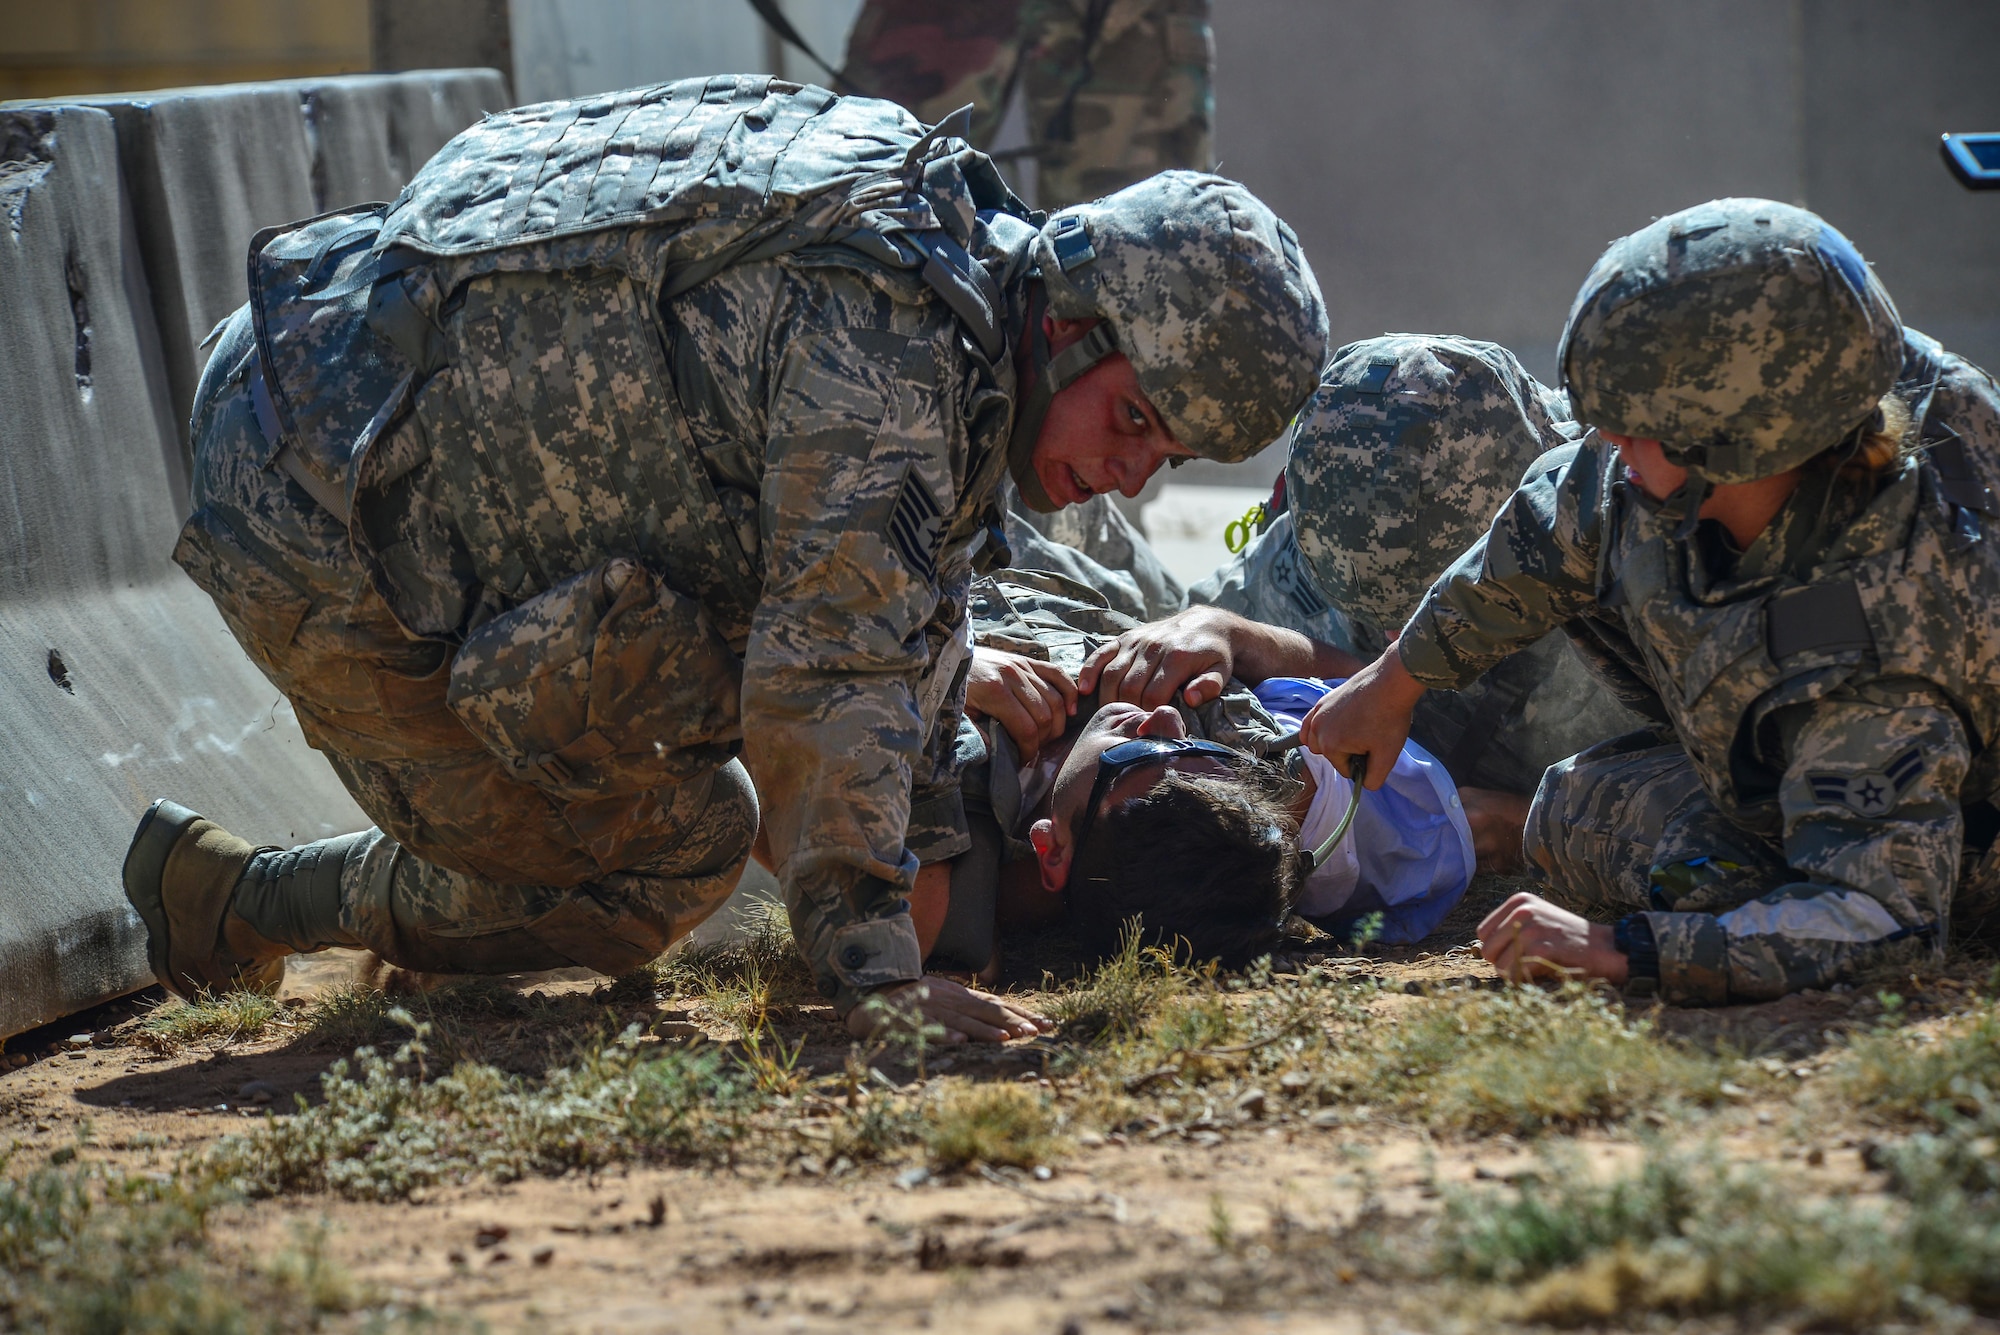 Medics from Langley Air Force Base, Va., pull a simulated patient to safety Sept. 17, 2015 at Melrose Air Force Range, N.M. Twenty-one teams of elite EMTs from 22 installations across the Air Force convened at Cannon Air Force Base, N.M., for two days of innovative, high-octane competition Sept. 17-18. Throughout the rodeo, teams were required to execute lifesaving missions under the critical eye of expert evaluators, demonstrating accurate techniques and effective implementation. (U.S. Air Force photo/Airman 1st Class Shelby Kay-Fantozzi)